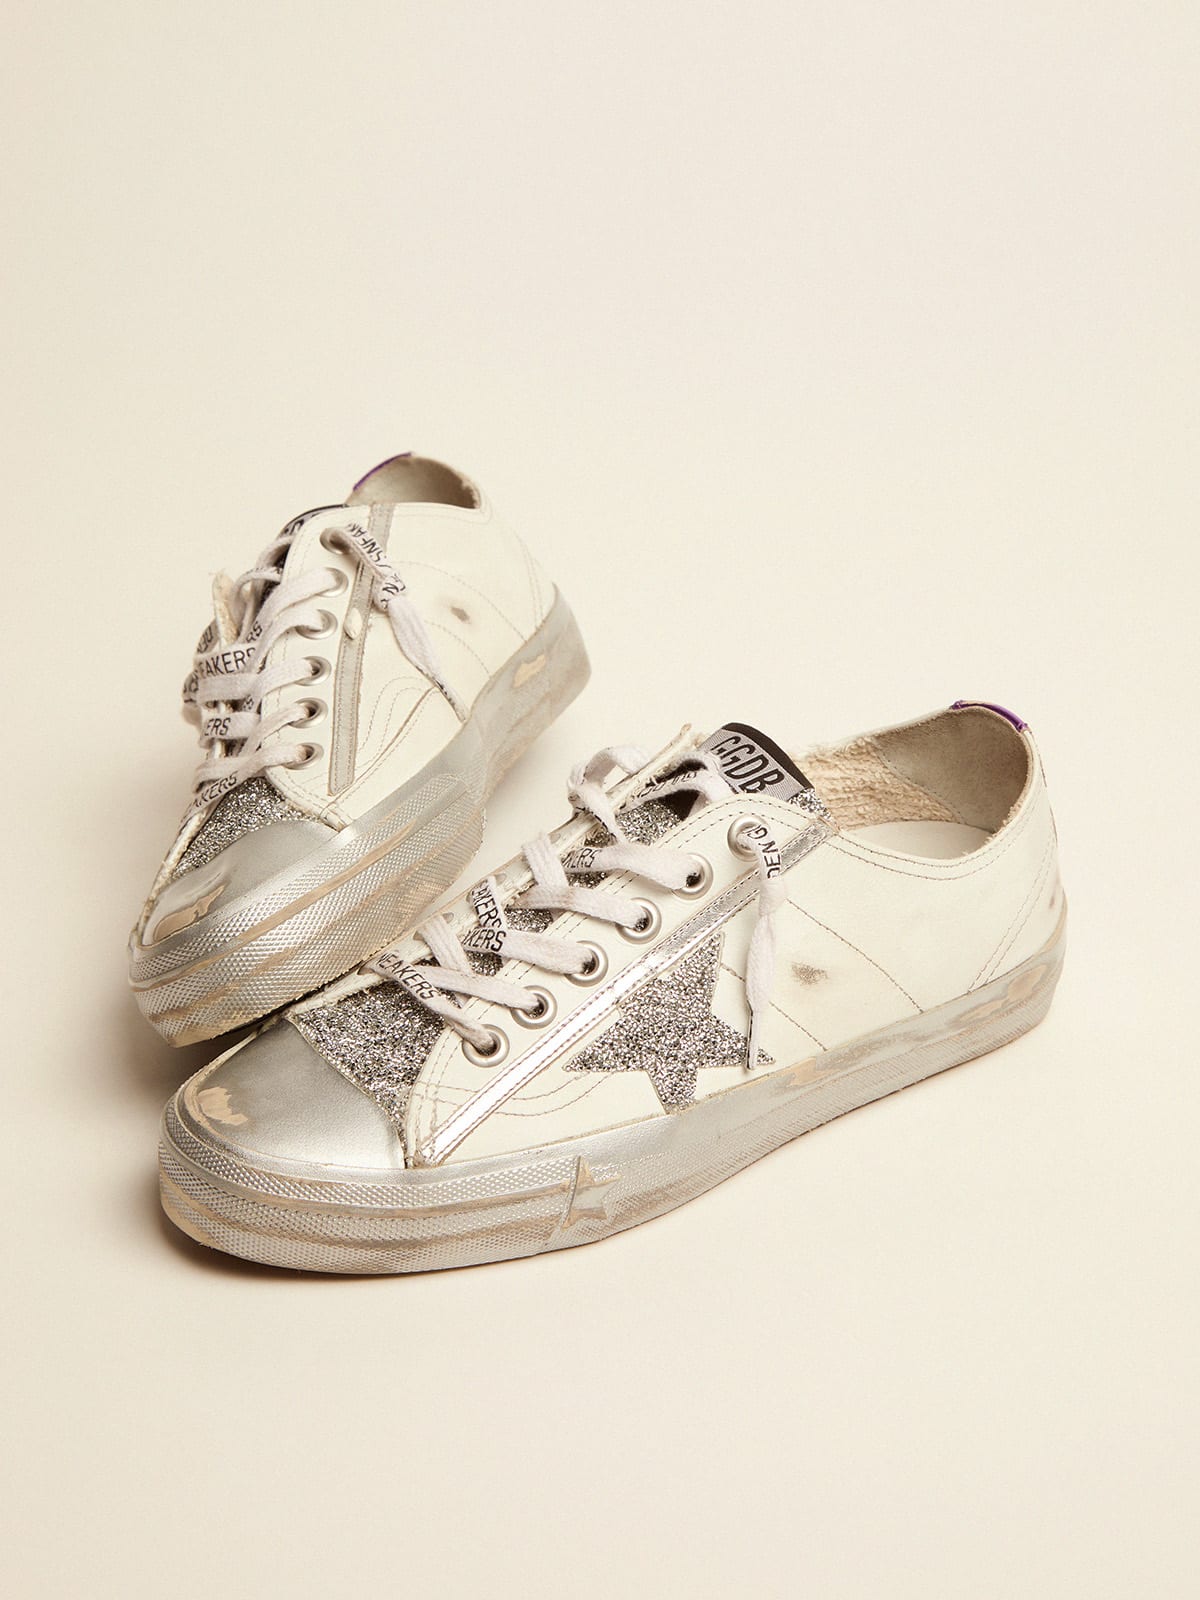 Golden Goose - V-Star LTD sneakers in white leather and crystals in 